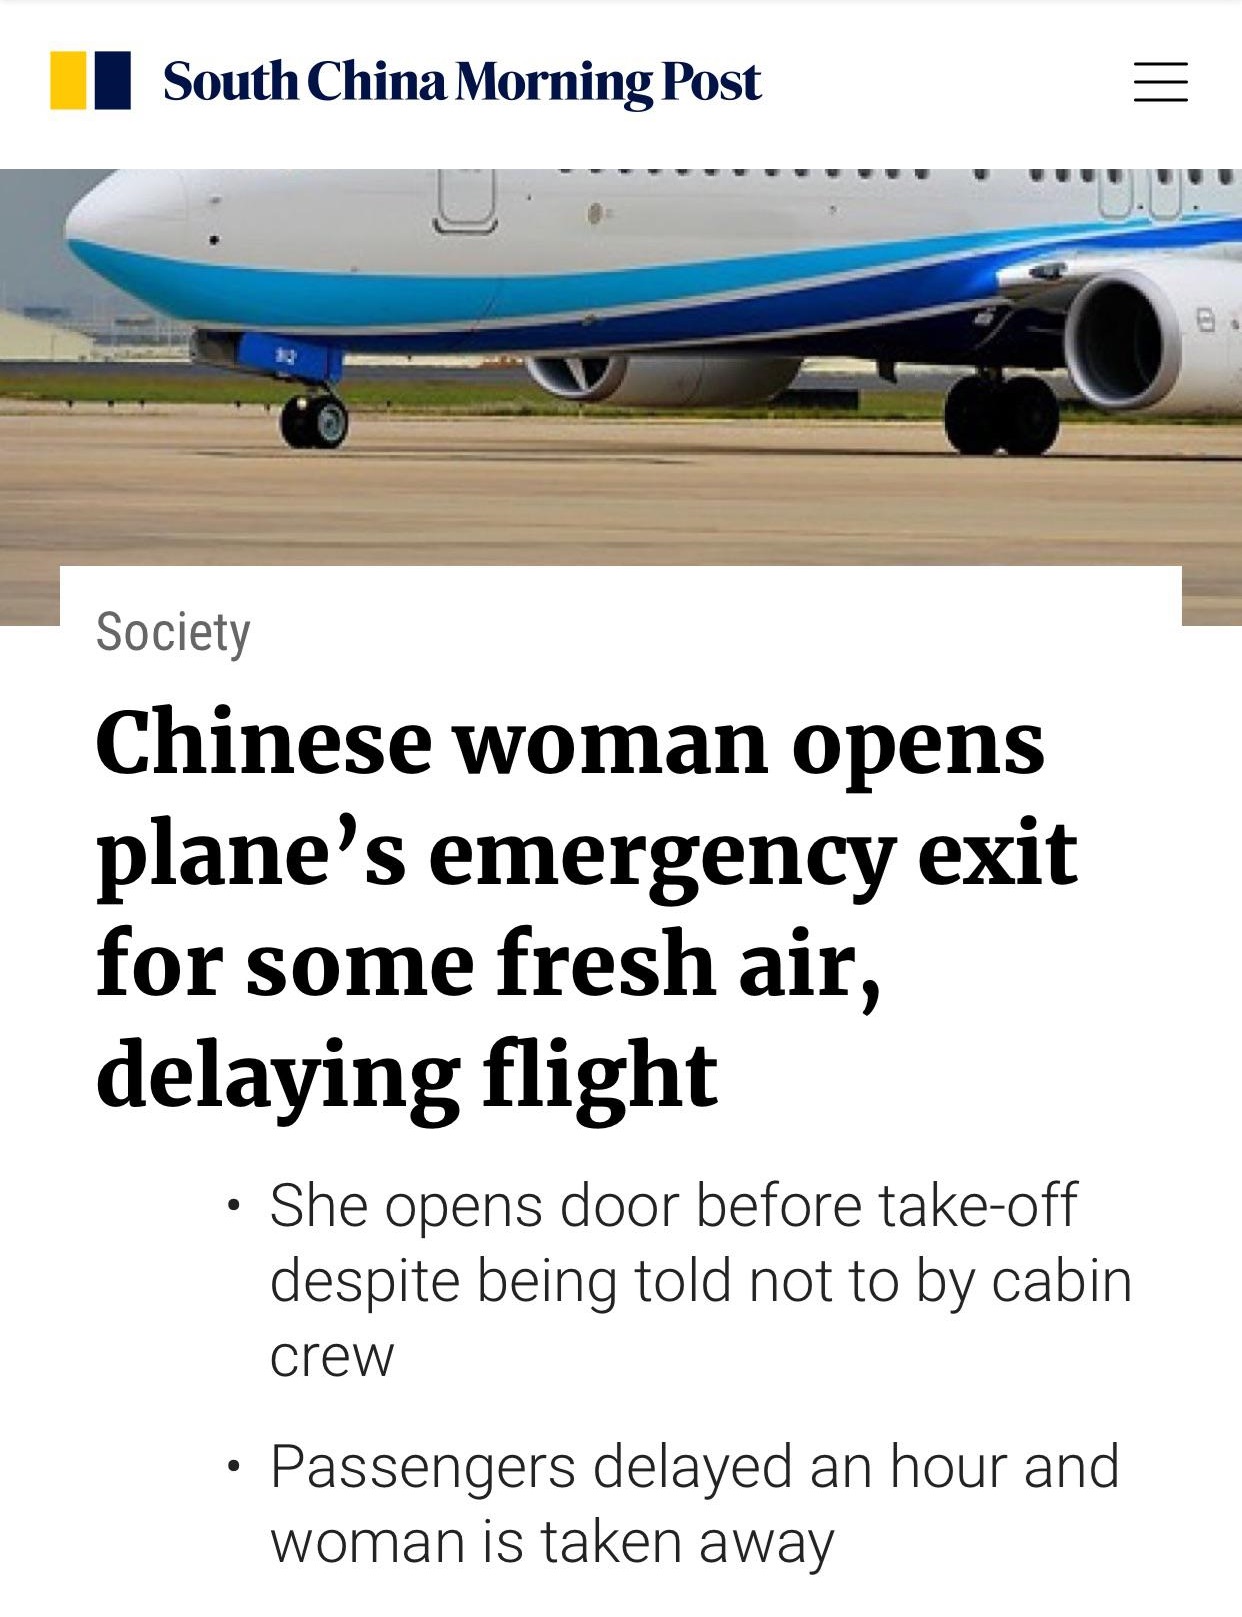 south china morning post - South China Morning Post Society Chinese woman opens plane's emergency exit for some fresh air, delaying flight She opens door before takeoff despite being told not to by cabin crew Passengers delayed an hour and woman is taken 